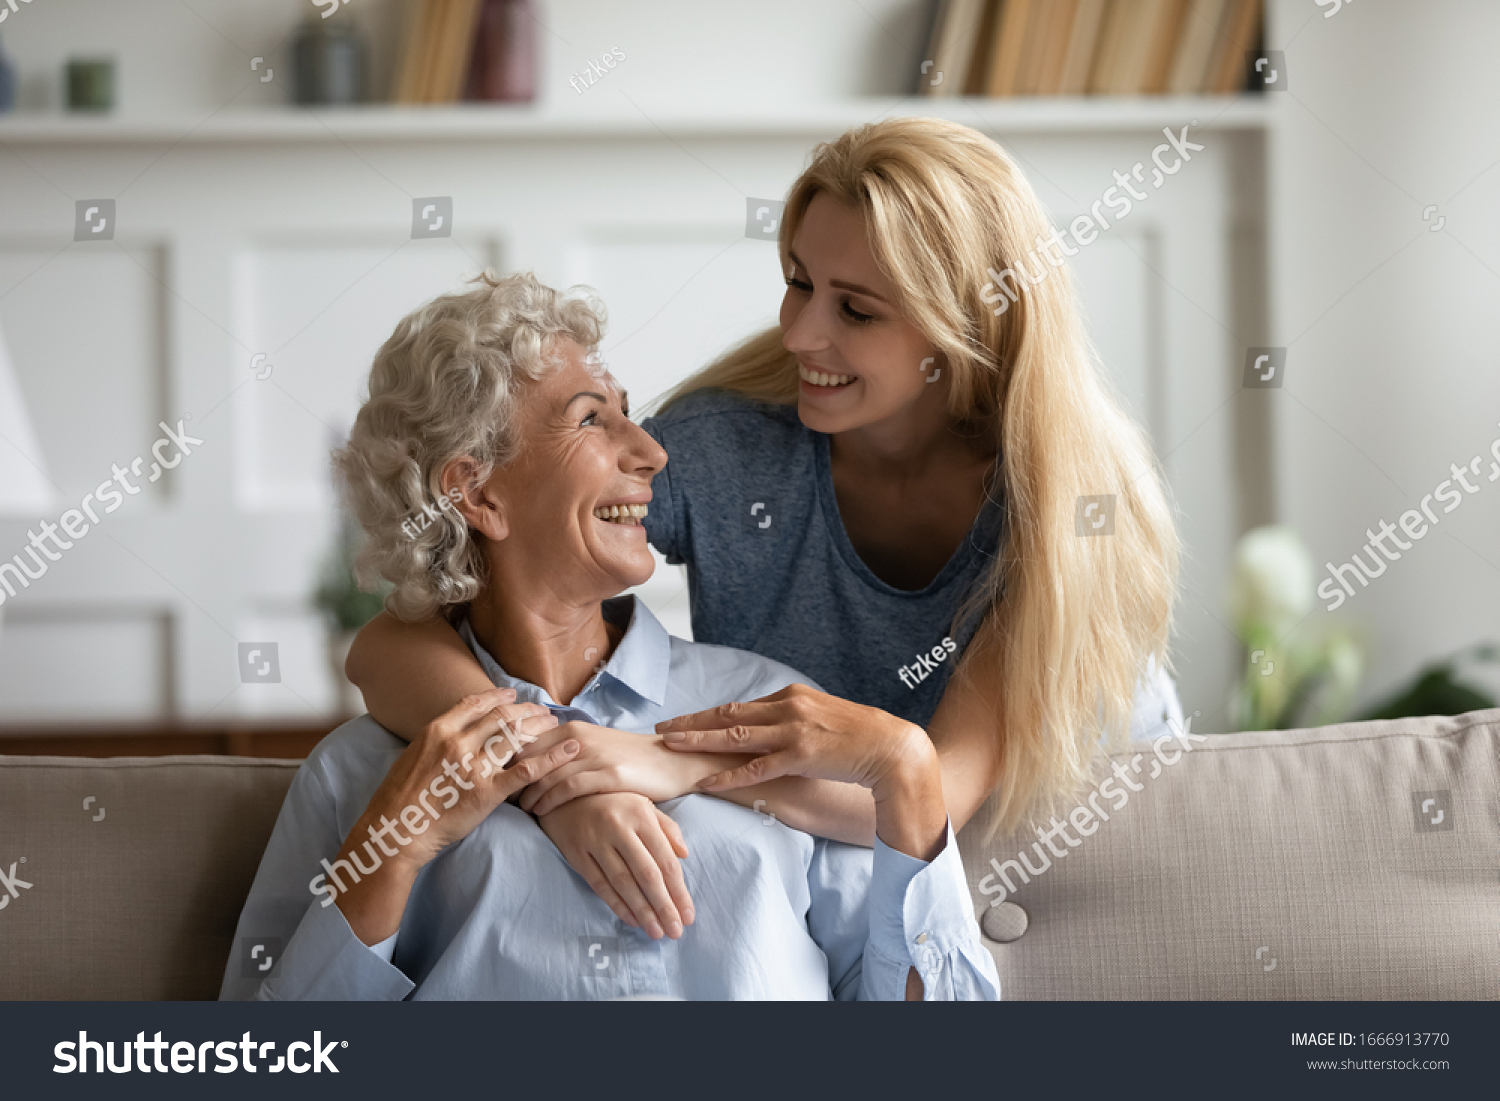 Overjoyed senior 60s mother and adult daughter relax together in living room hugging and cuddling, happy mature mum and grownup girl embrace show love enjoy home family weekend together #1666913770